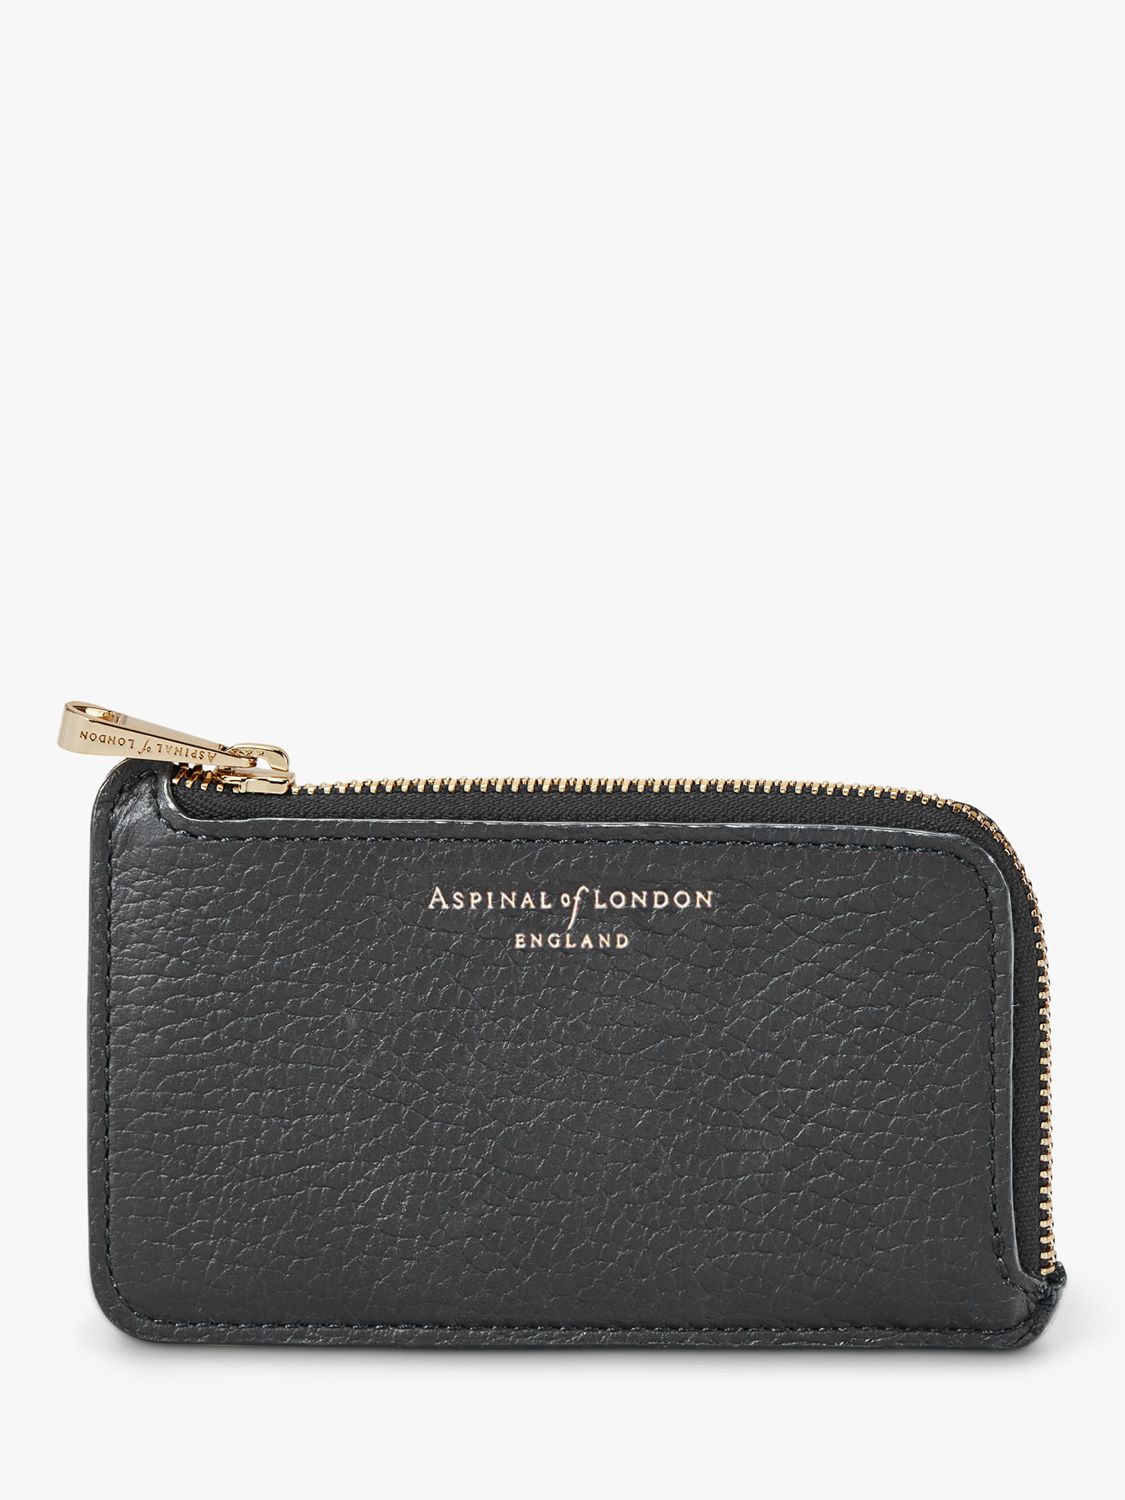 Aspinal of London Pebble Leather Zipped Coin and Card Holder, Black